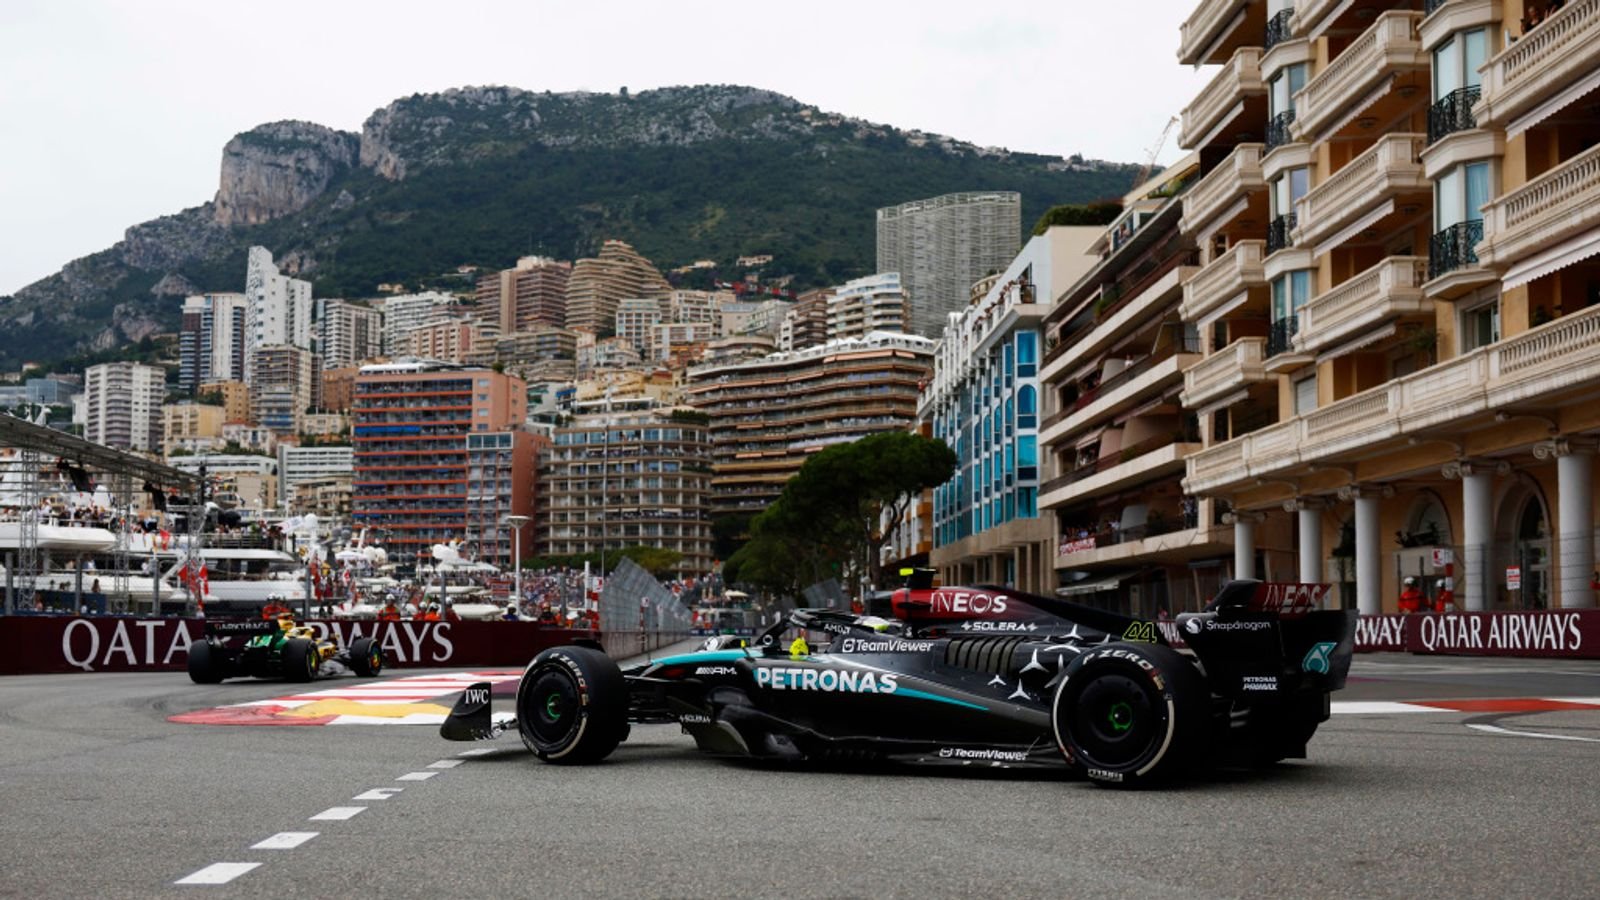 Monaco GP: Lewis Hamilton tops first practice as Mercedes show encouraging pace at famous street circuit | F1 News